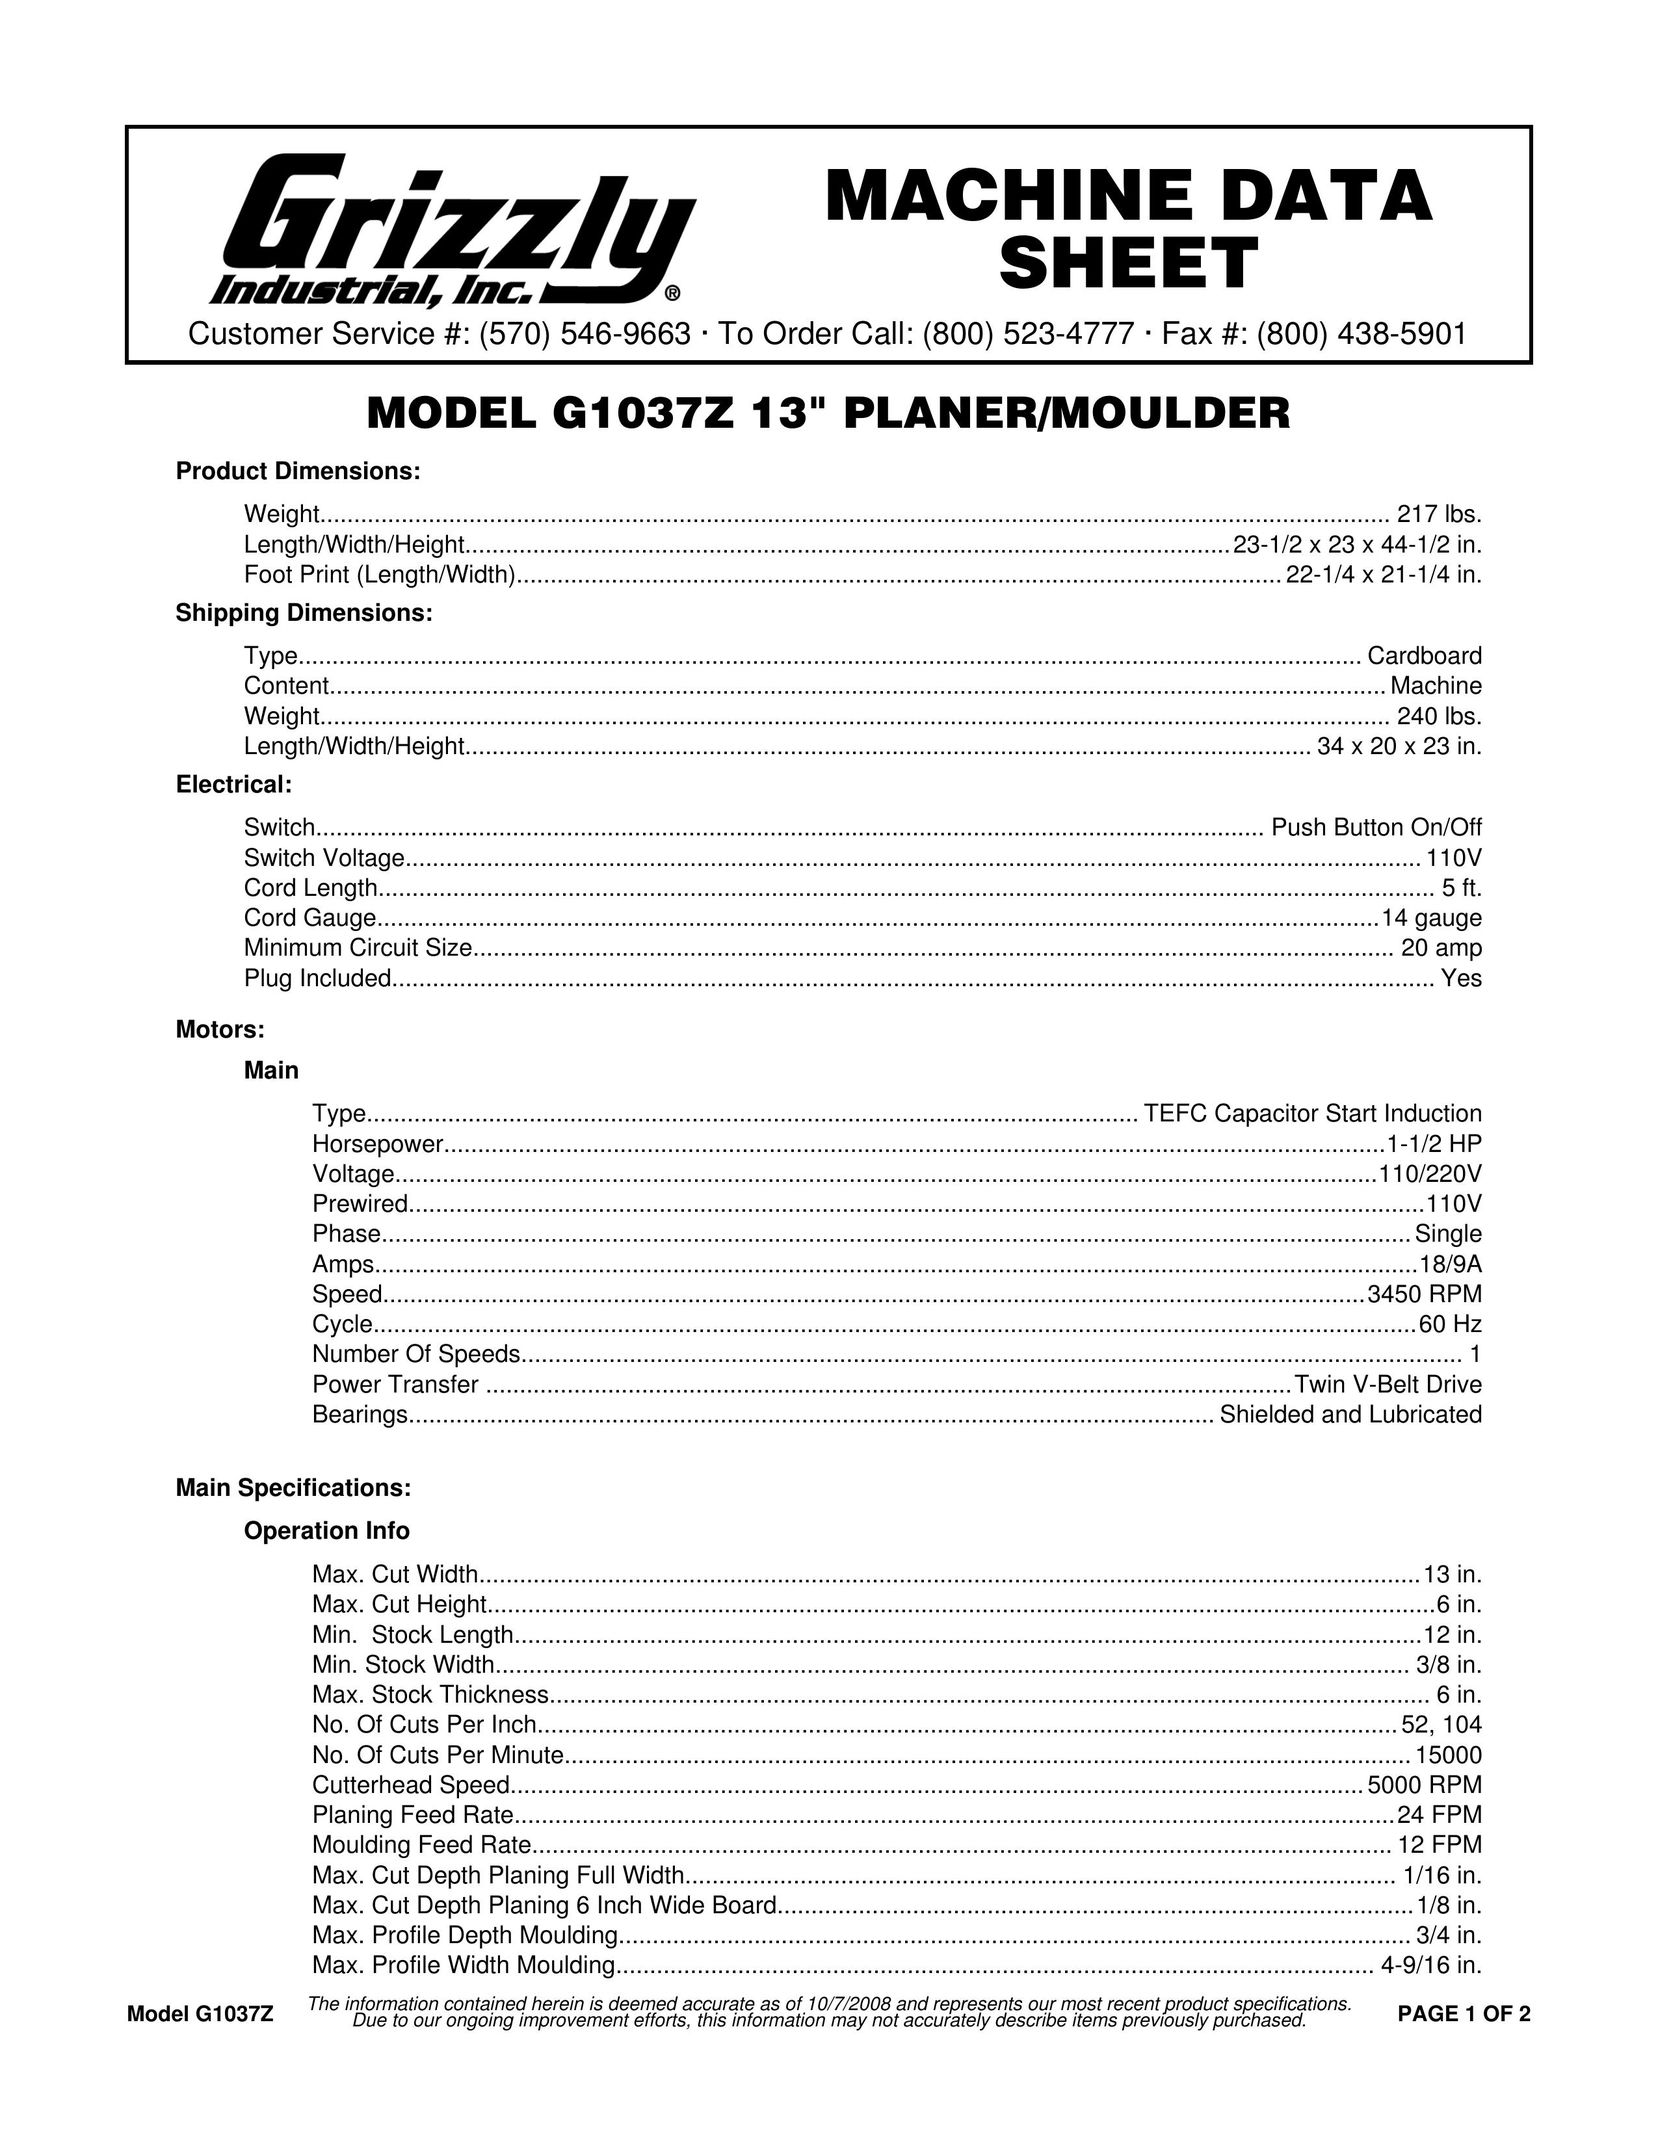 Grizzly G1037Z Planer User Manual